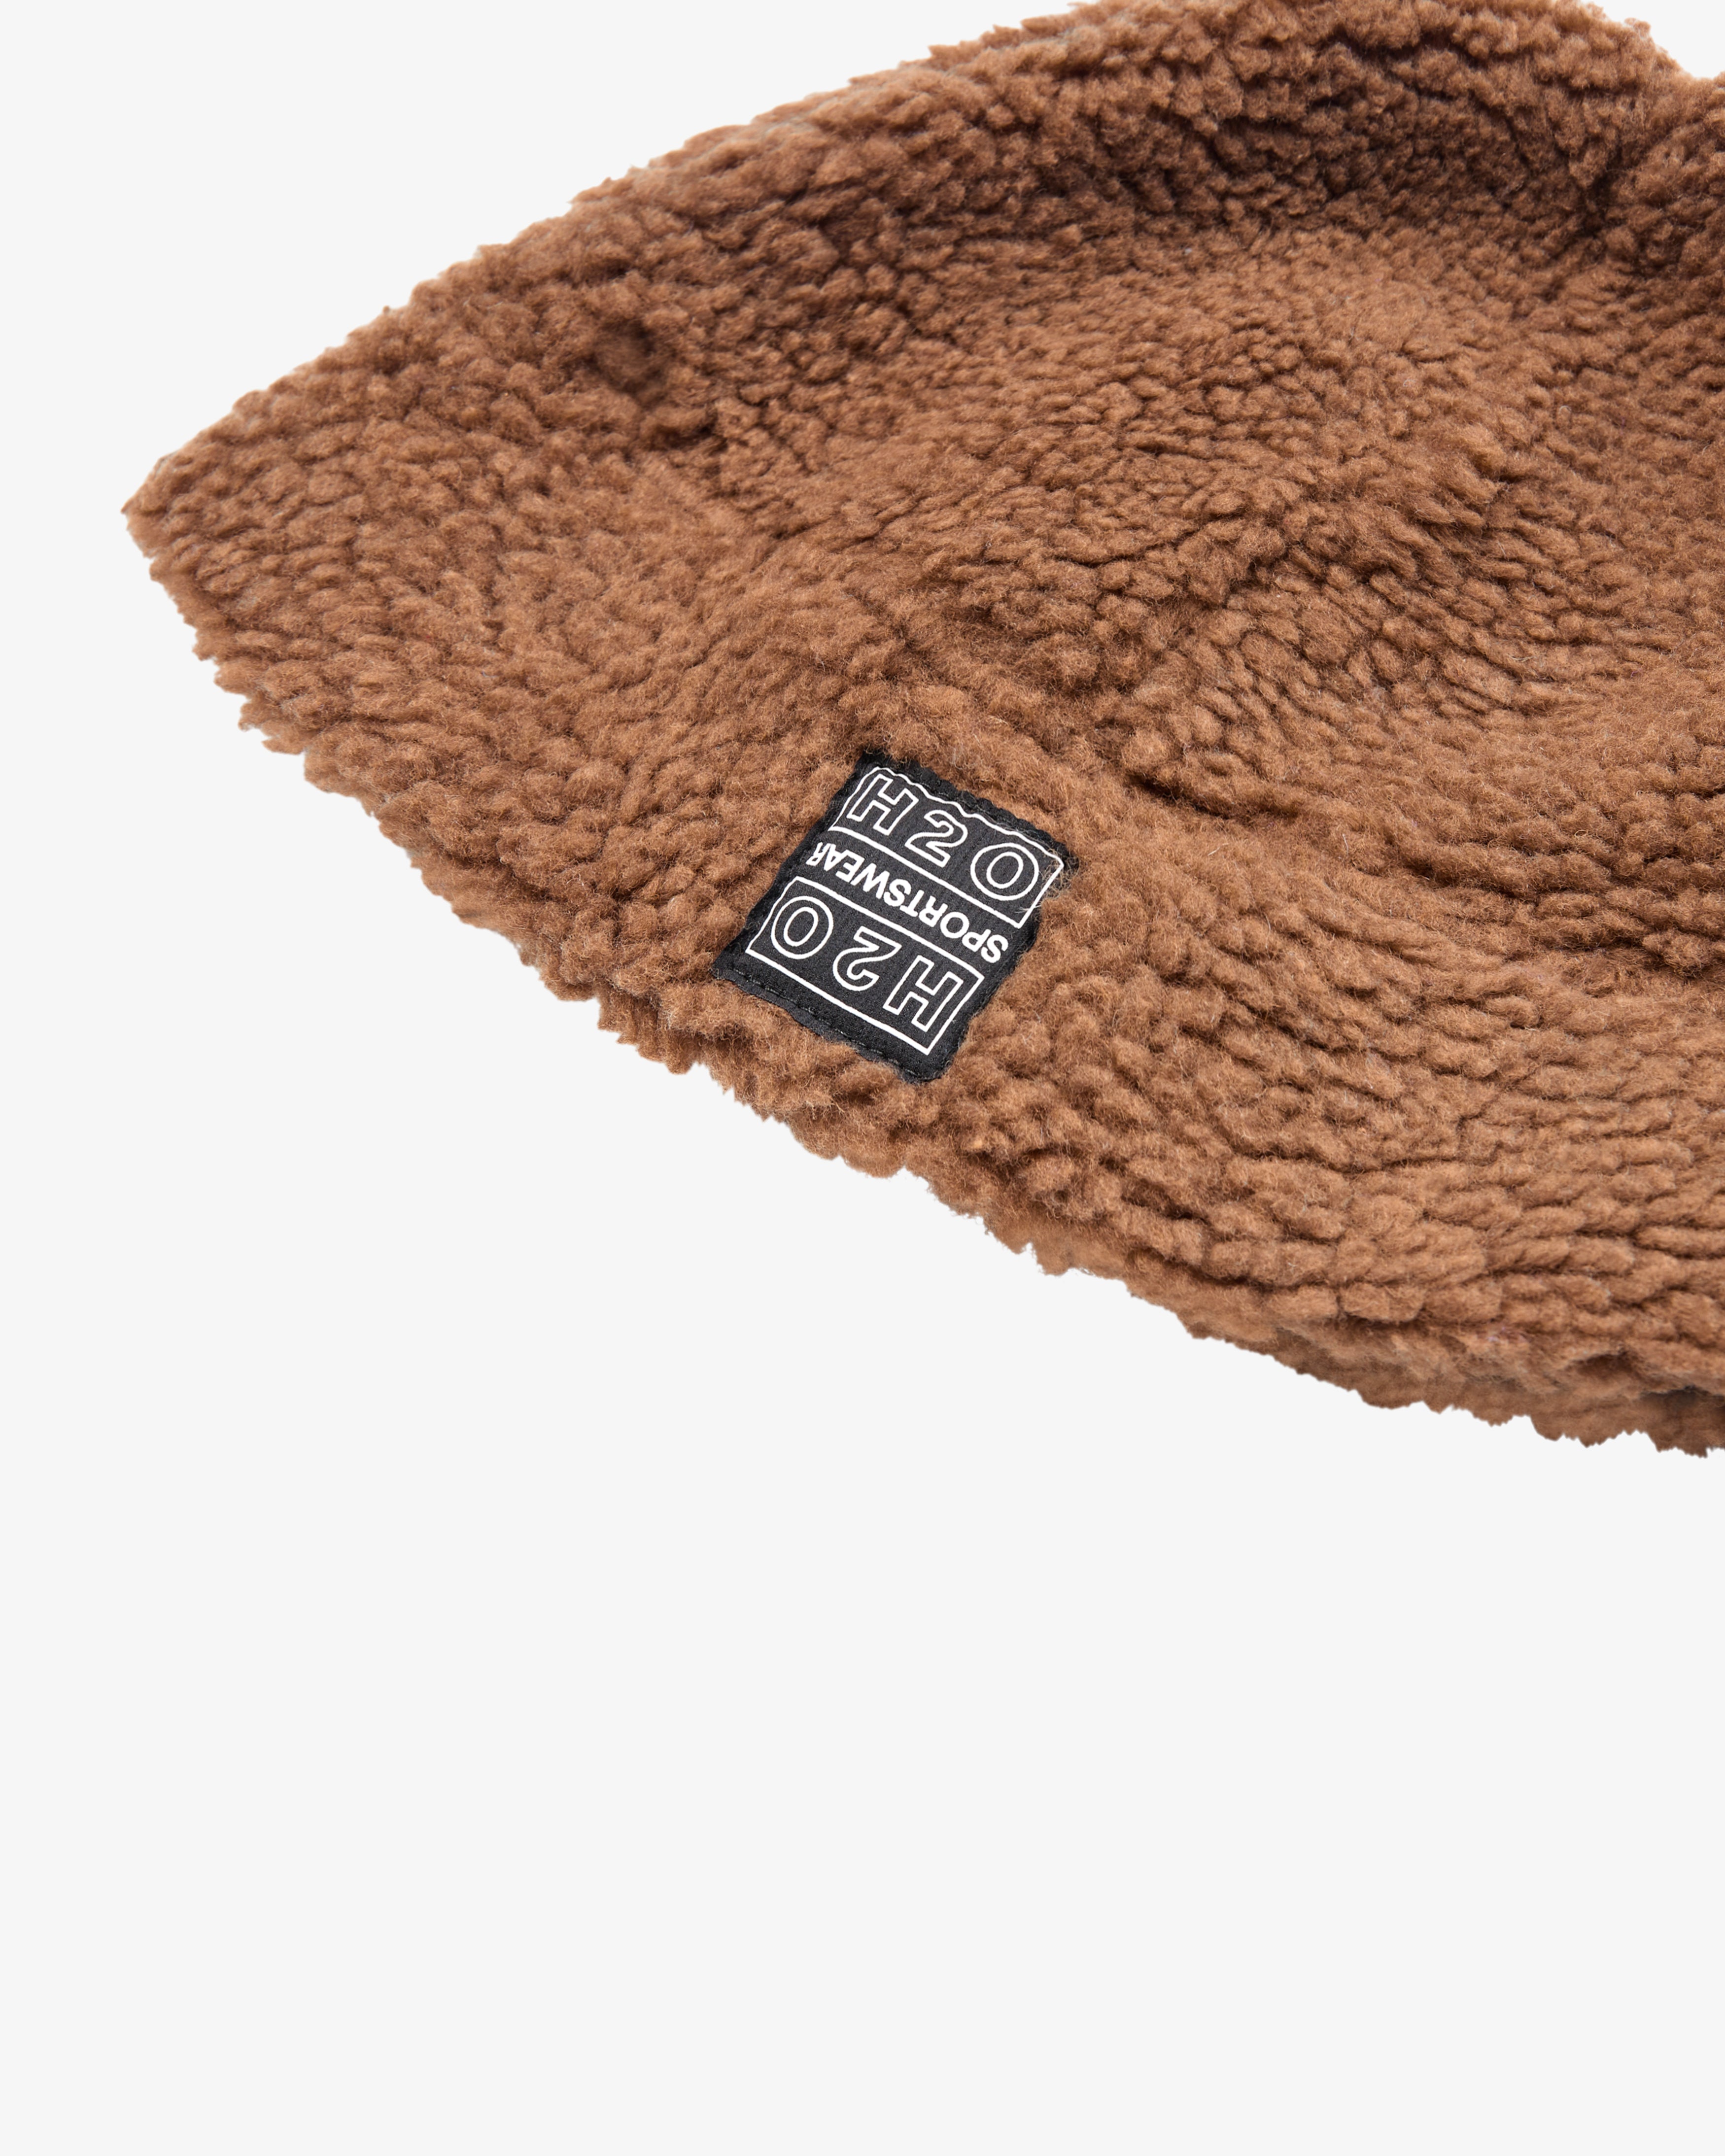 H2O Langli Pile Hat Accessories 3560 Bison Brown